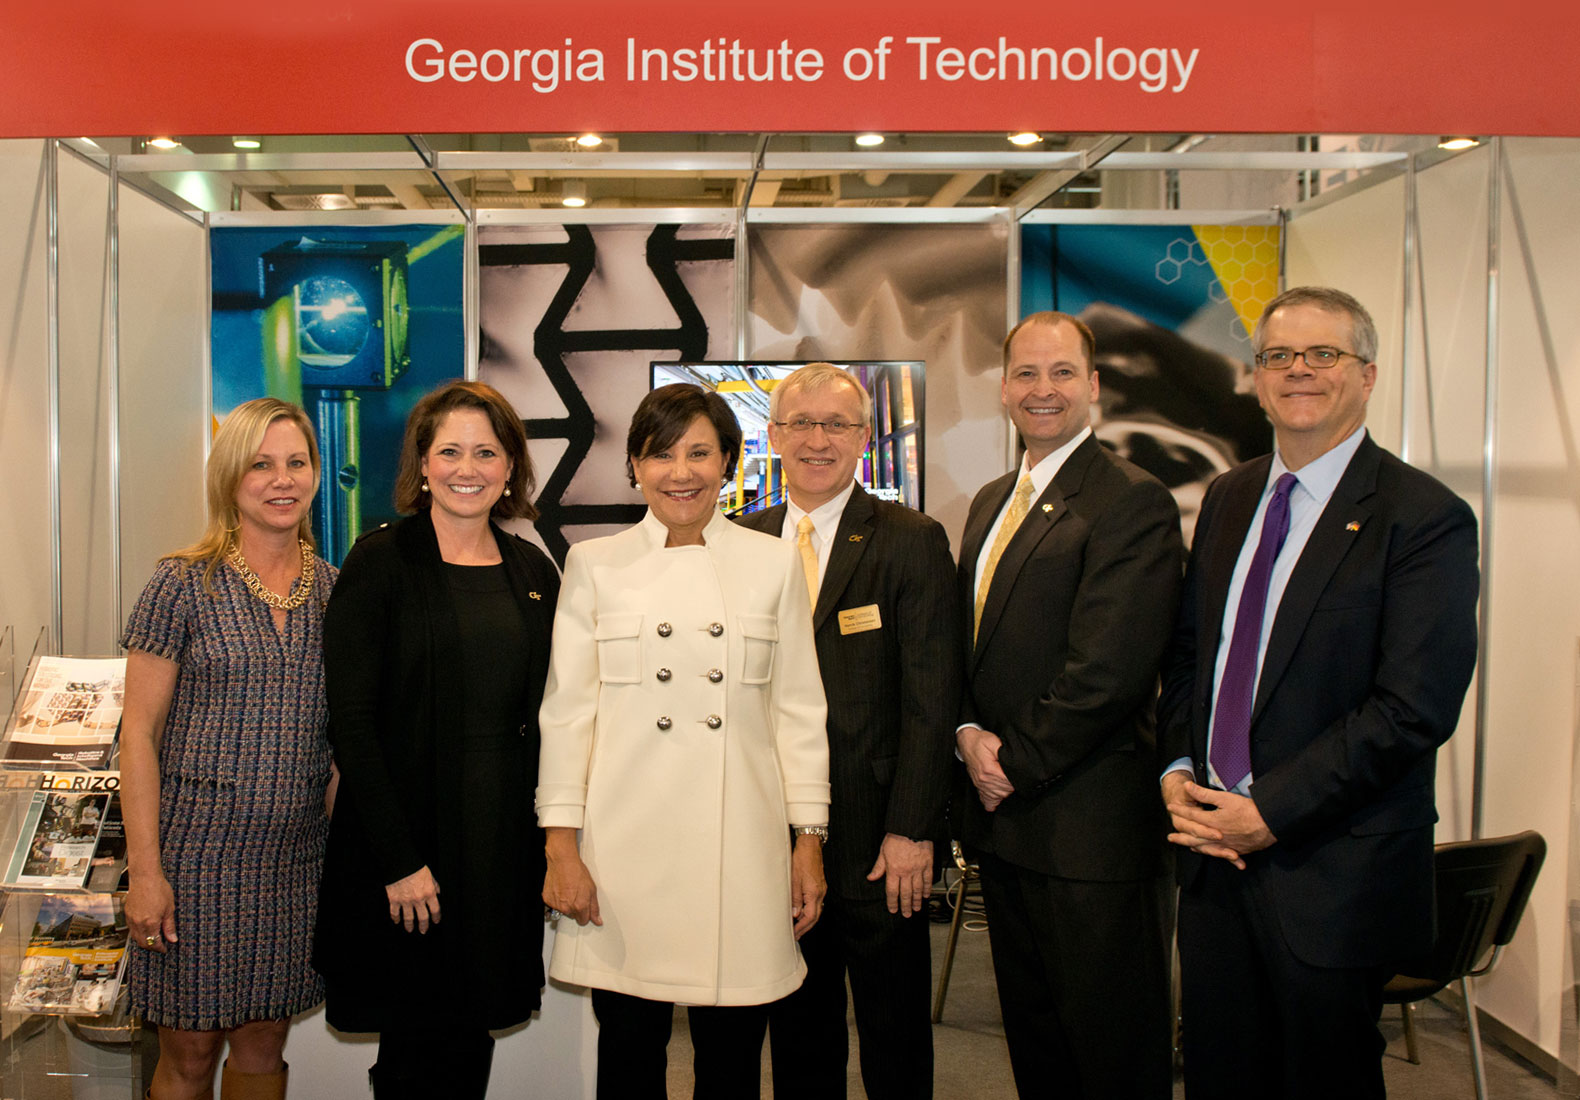 Group photo of Georgia Tech representatives with federal leaders at Hannover Messe 2016